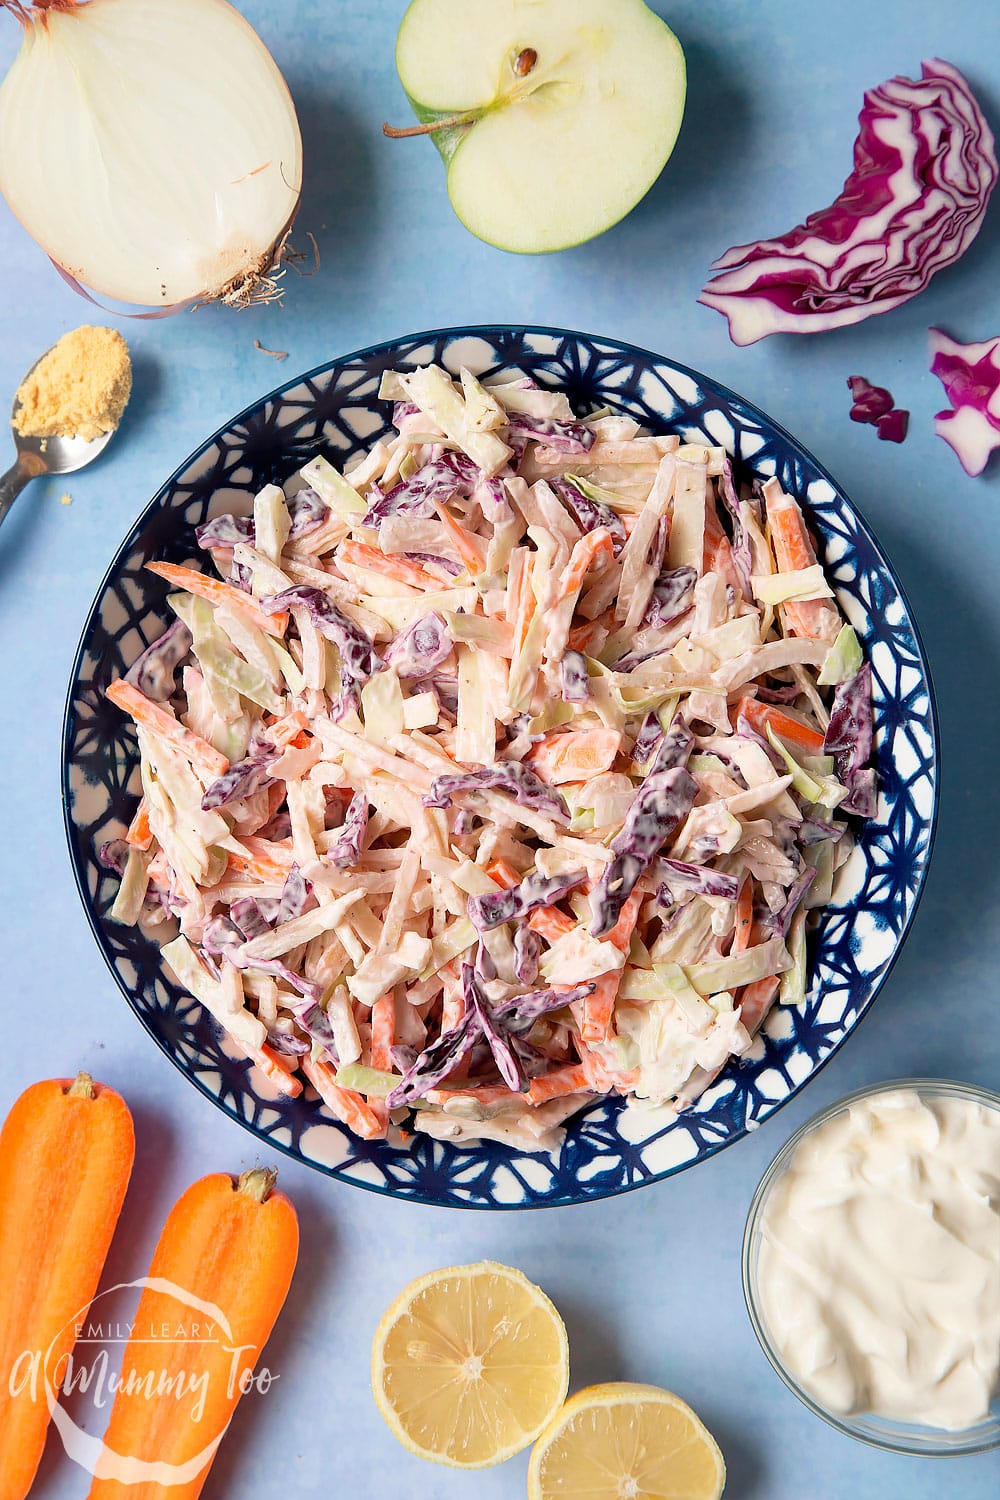 Creamy coleslaw without mayo served in a bowl. The bowl is surrounded by vegetables and creme fraiche.